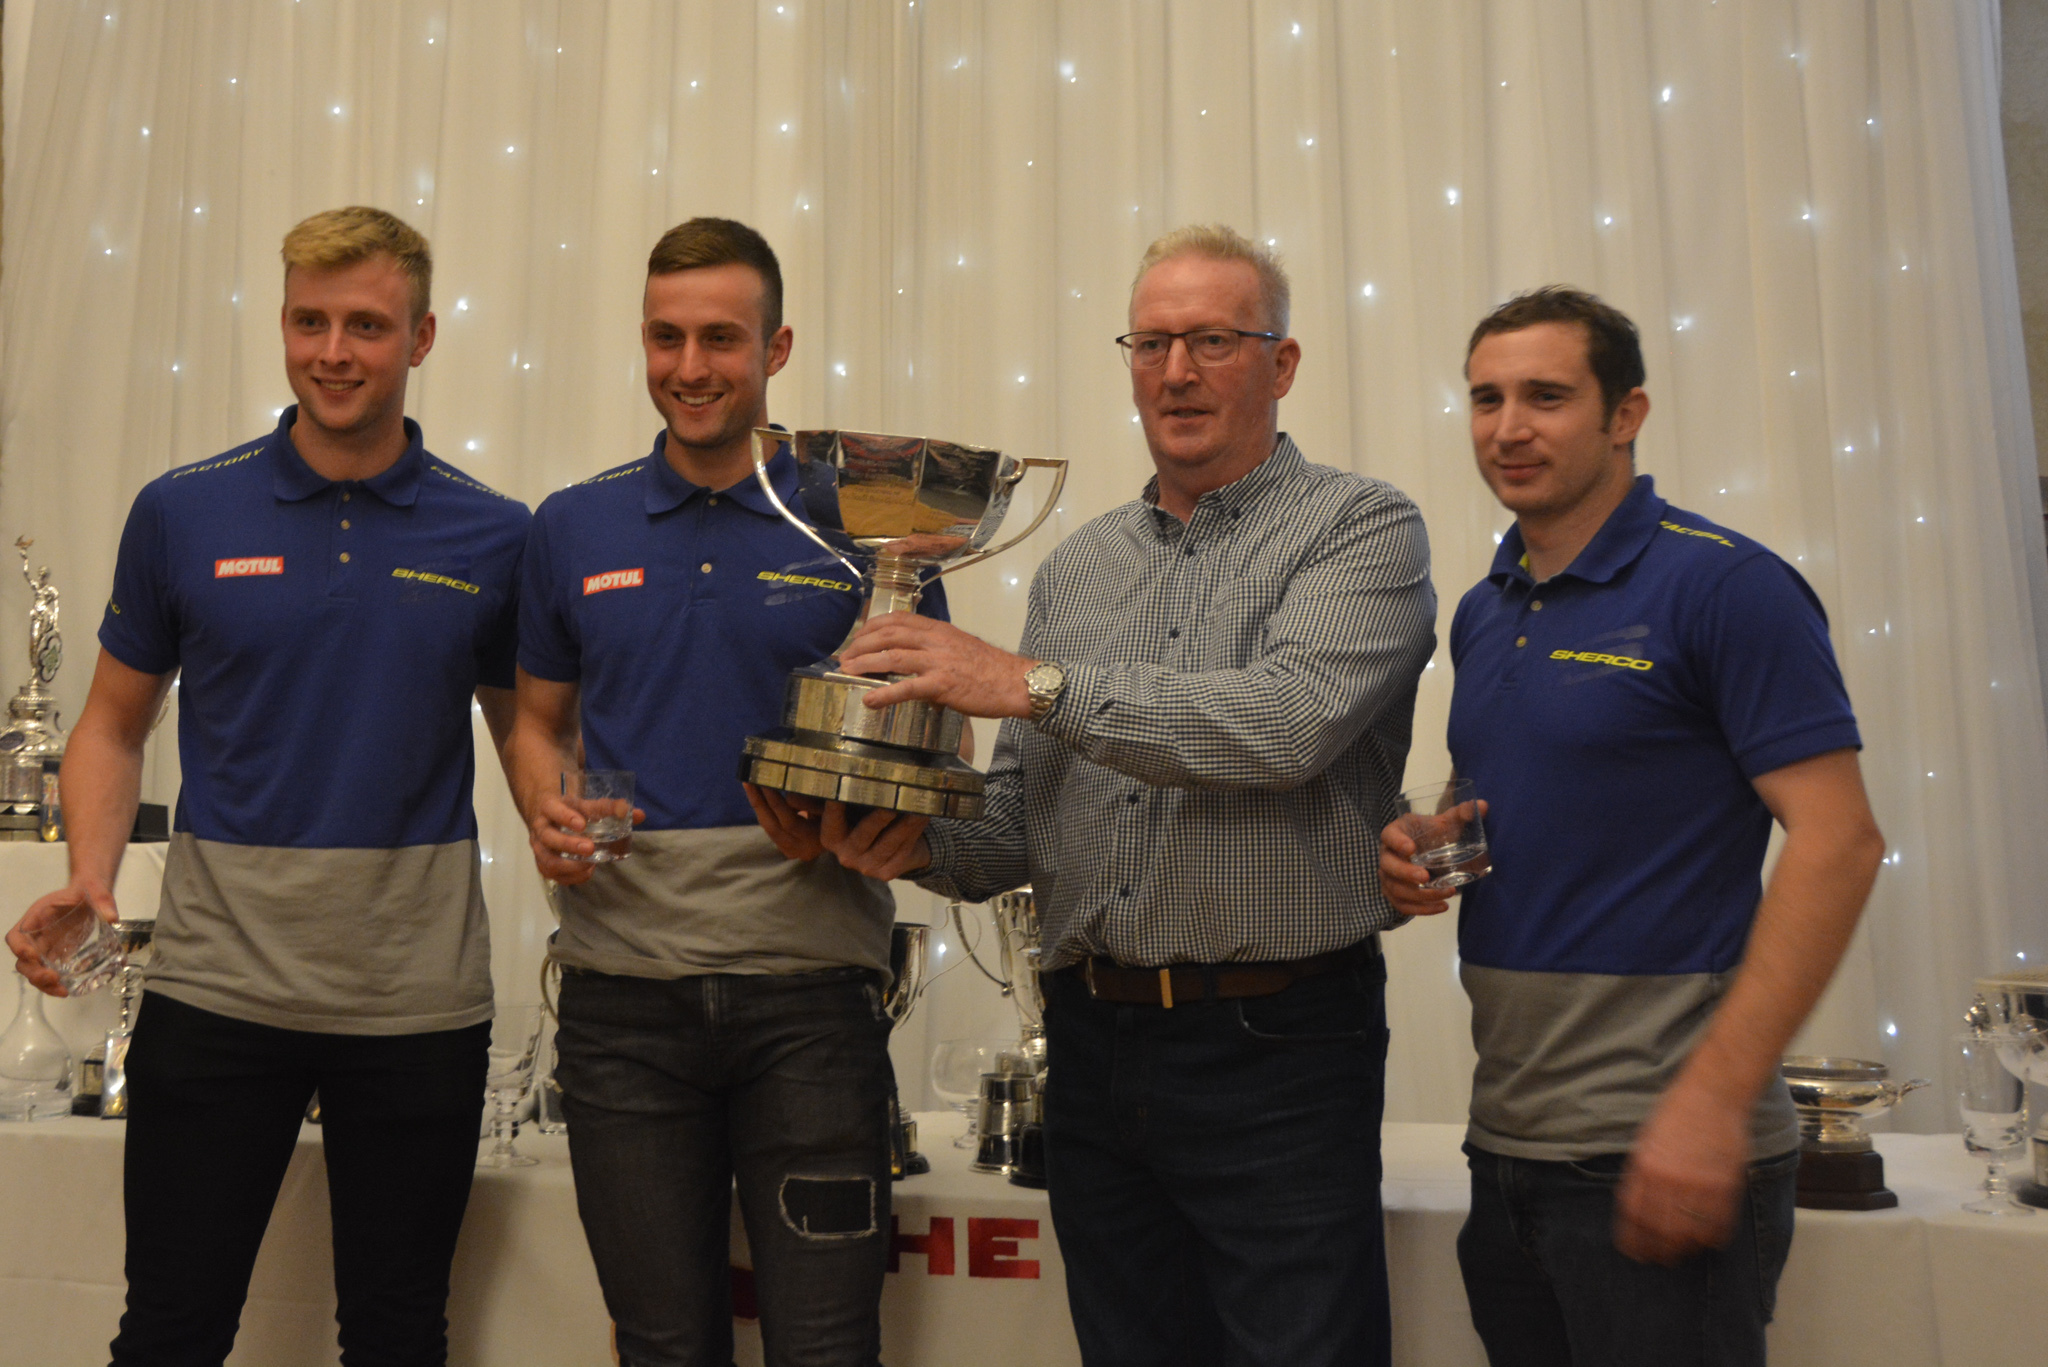 The Manufacturer Team winner went to the Malcolm Rathmell Sport Sherco A Team; Jack Peace (51), Michael Brown (43) and Dan Peace (64)